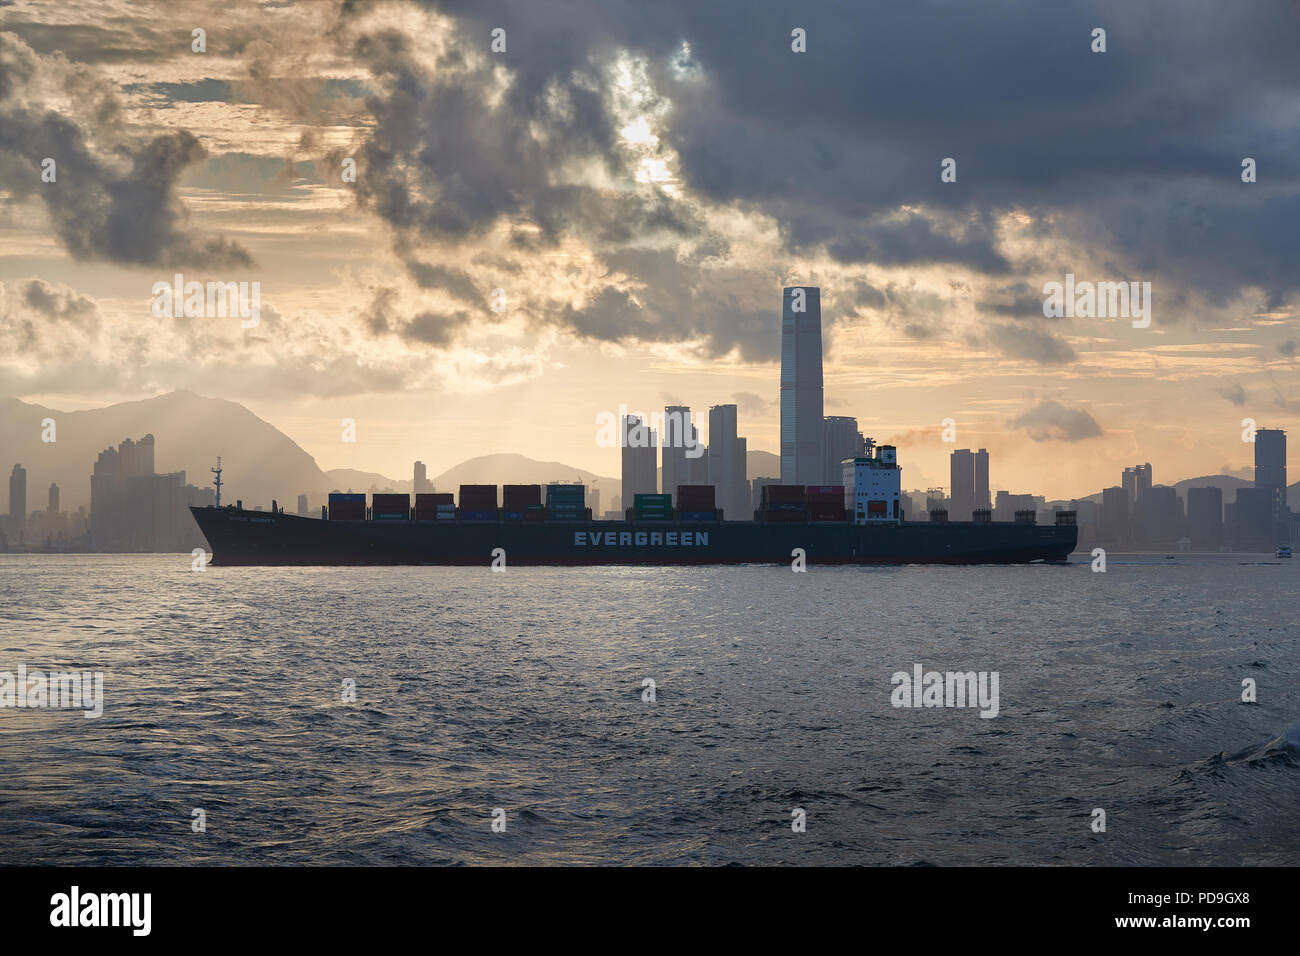 Evergreen Container Ship, EVER DAINTY, Crossing Victoria Harbour, Heading For The Kwai Tsing Container Terminal, Hong Kong. Stock Photo